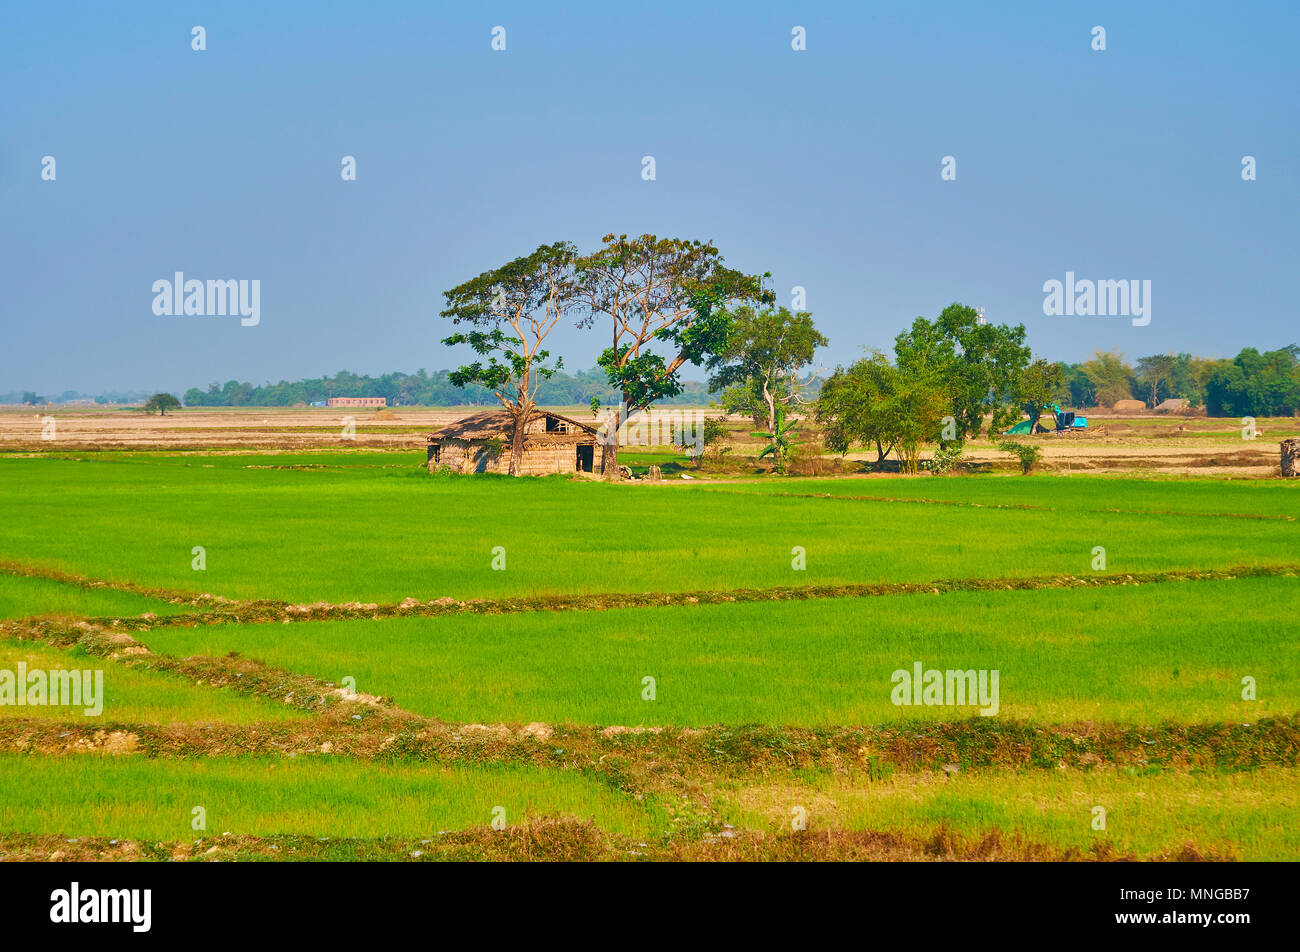 The small farmer's house under the trees with juicy green paddy-fields on the foreground, Bago Region, Myanmar. Stock Photo